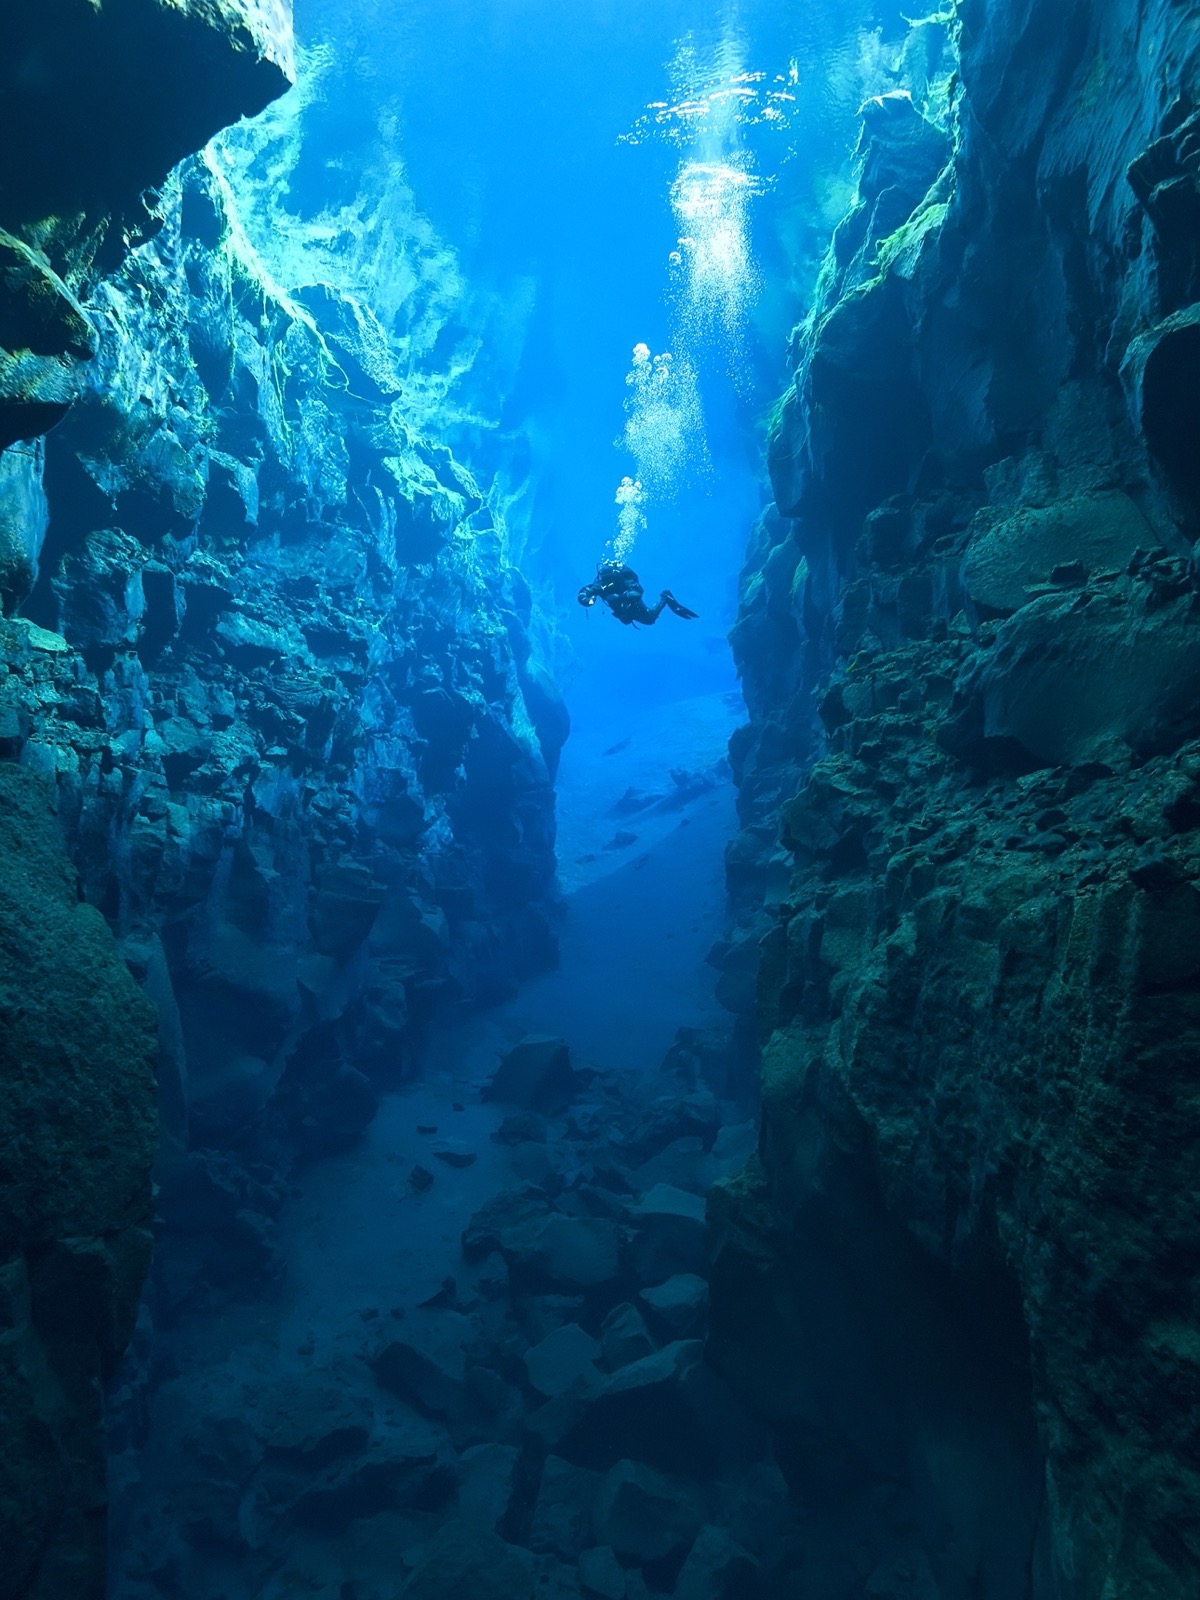 We Know How Brave You Are Based on the Adventurous Activities You Are Willing to Take Part in Snorkel between continents at Thingvellir National Park